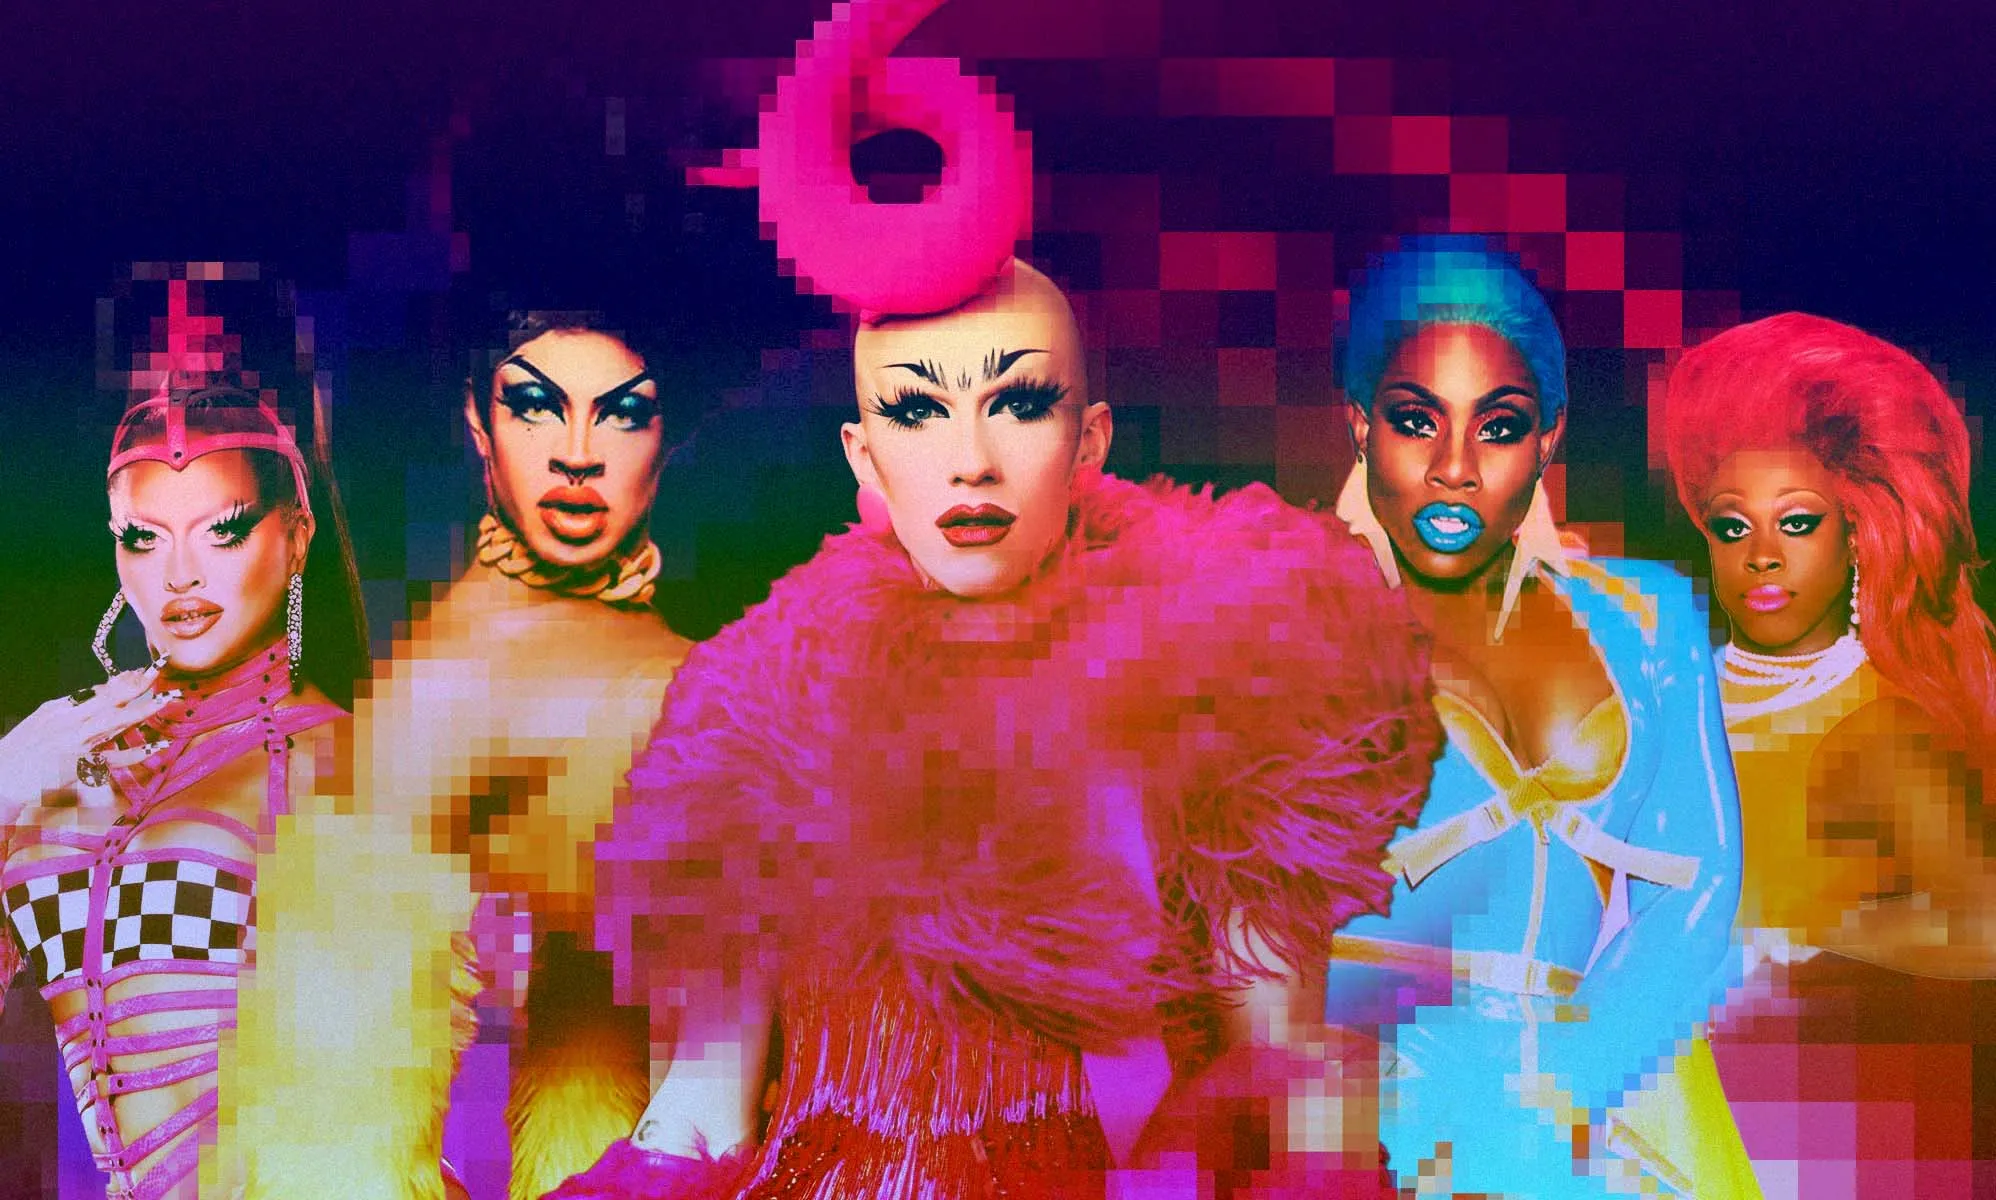 All 15 seasons of RuPaul's Drag Race US, ranked worst to best